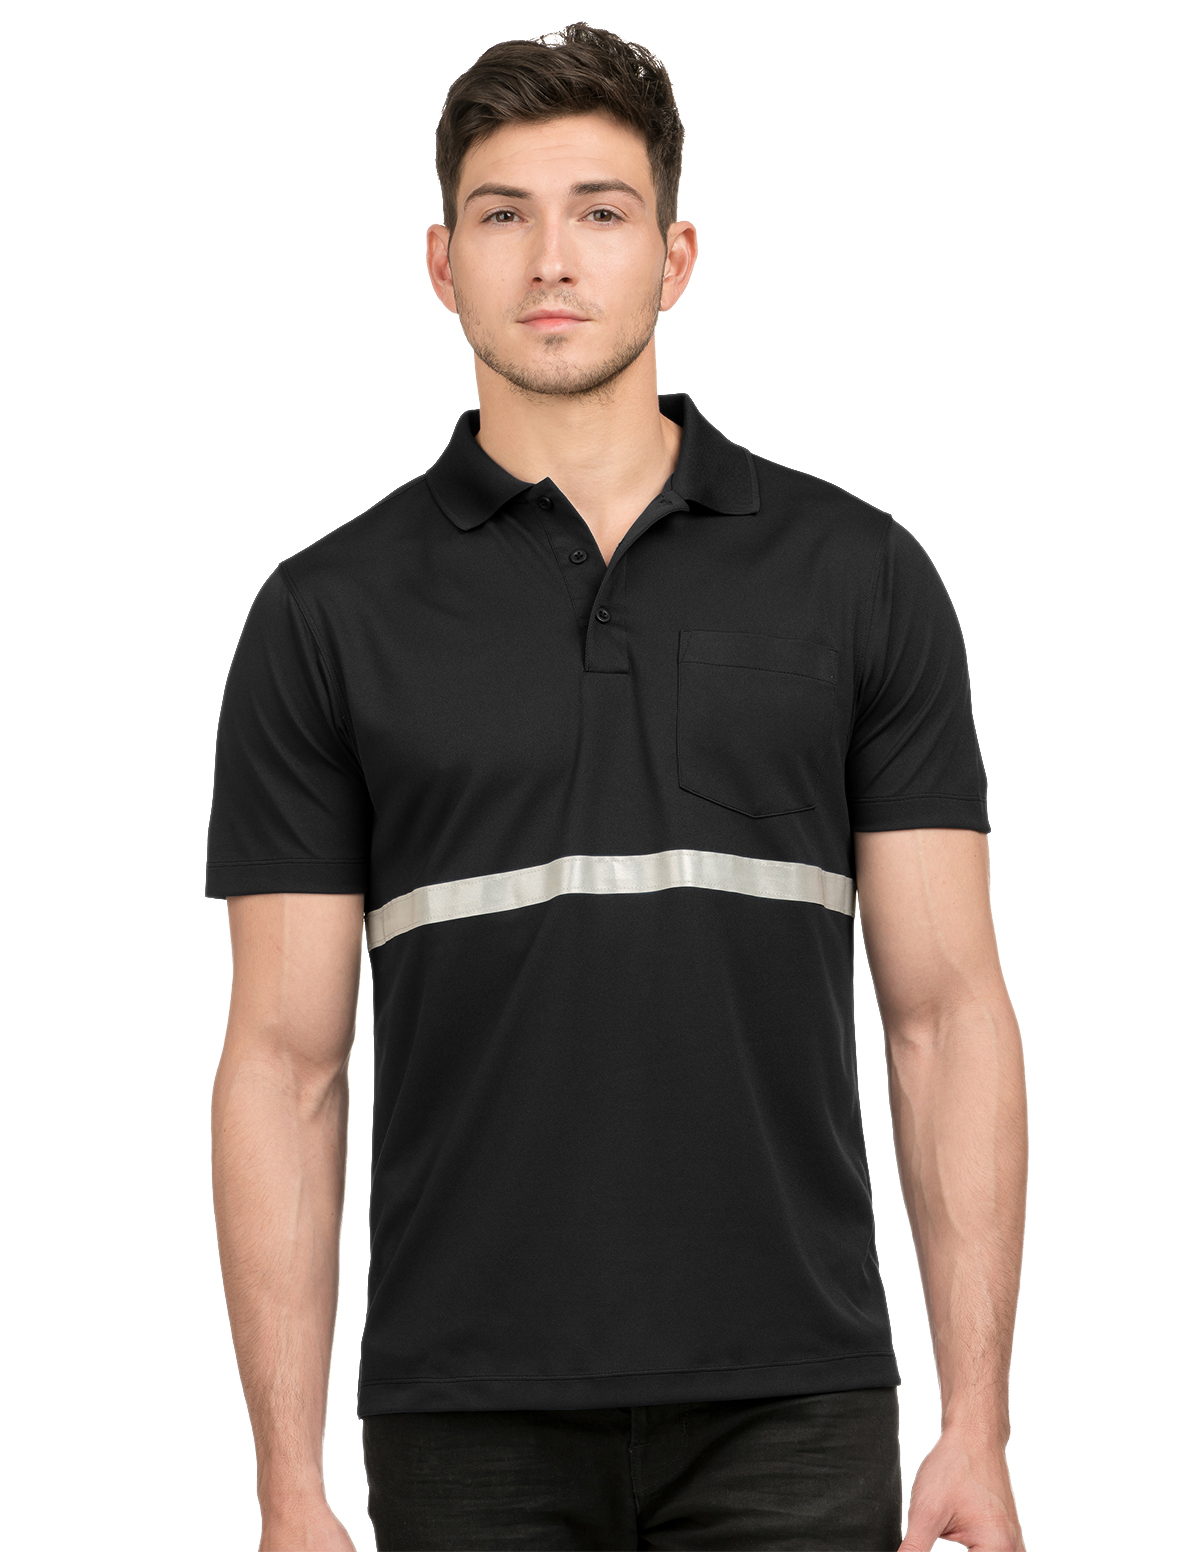 Tri-Mountain K035 - Civic Pocketed Polo with Reflective Tape